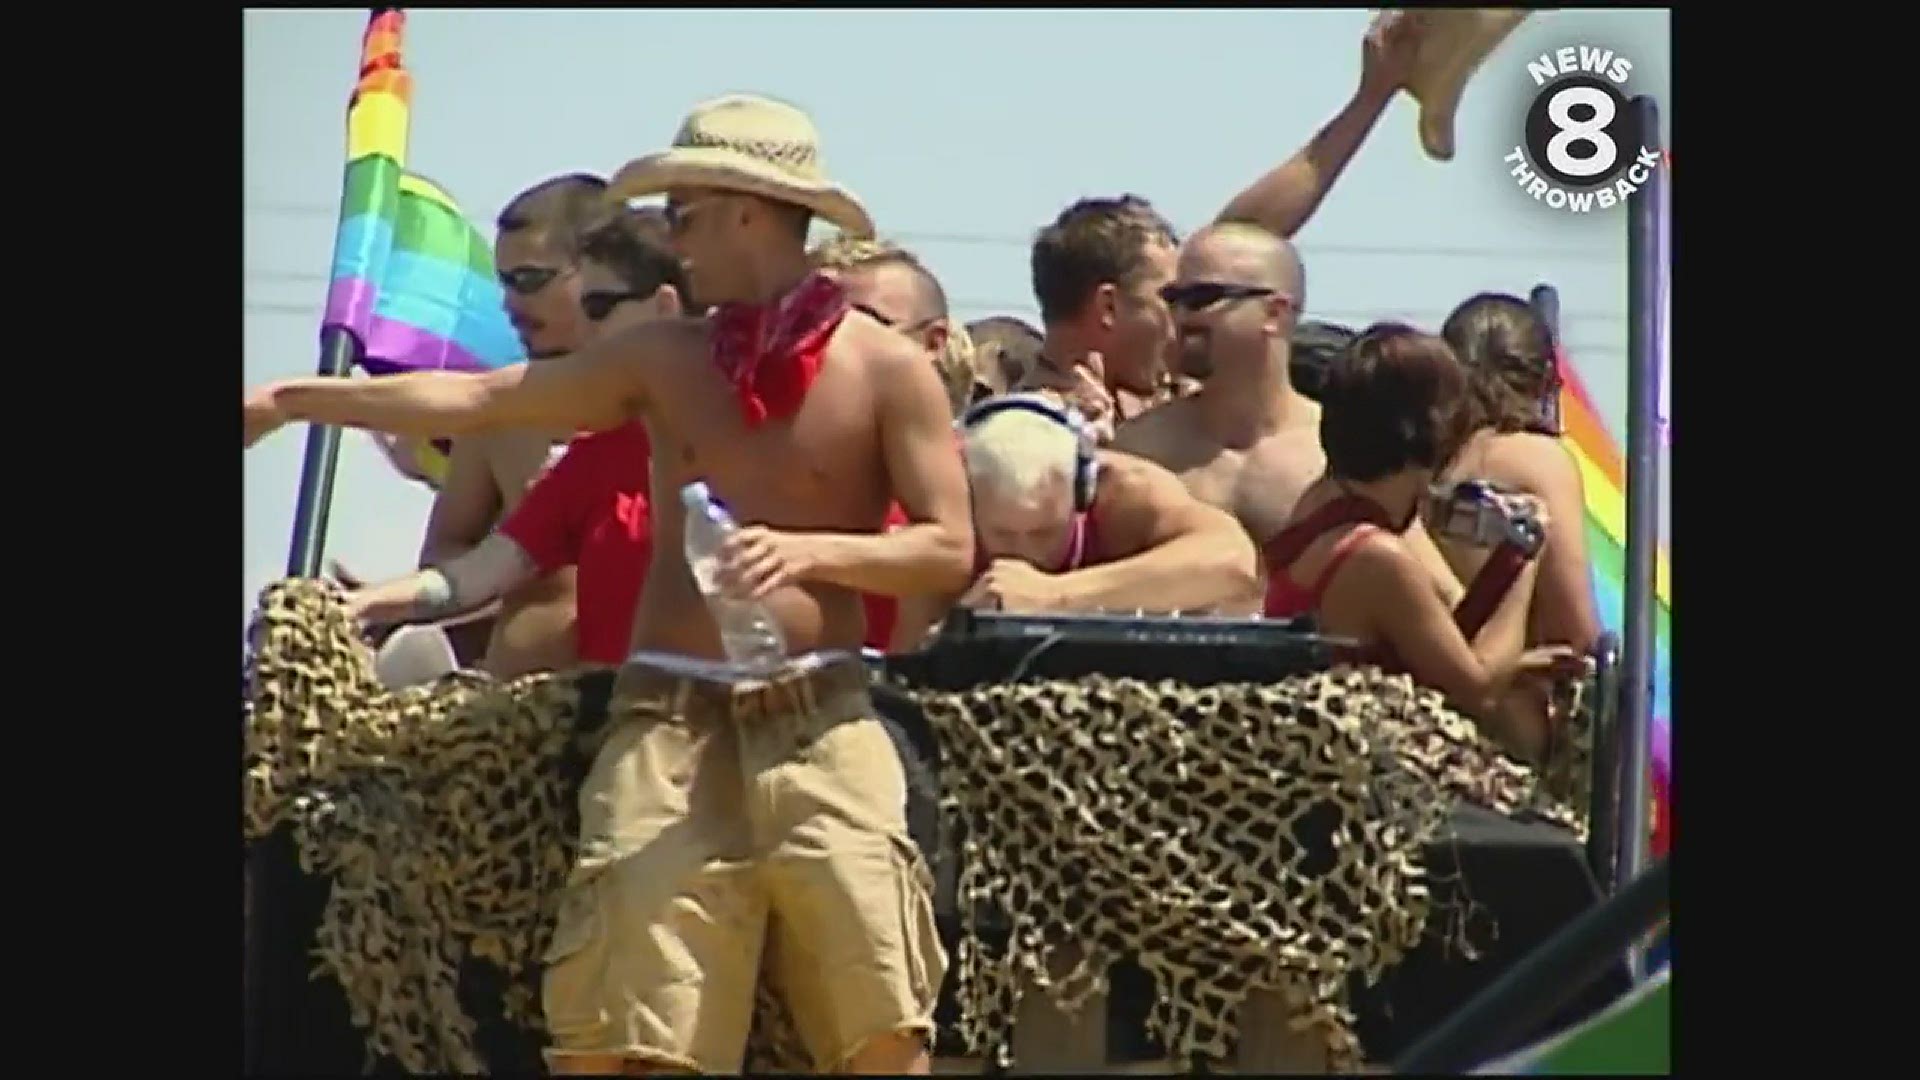 The atmosphere at the 2005 San Diego Pride parade was one of celebration with music and dancing.